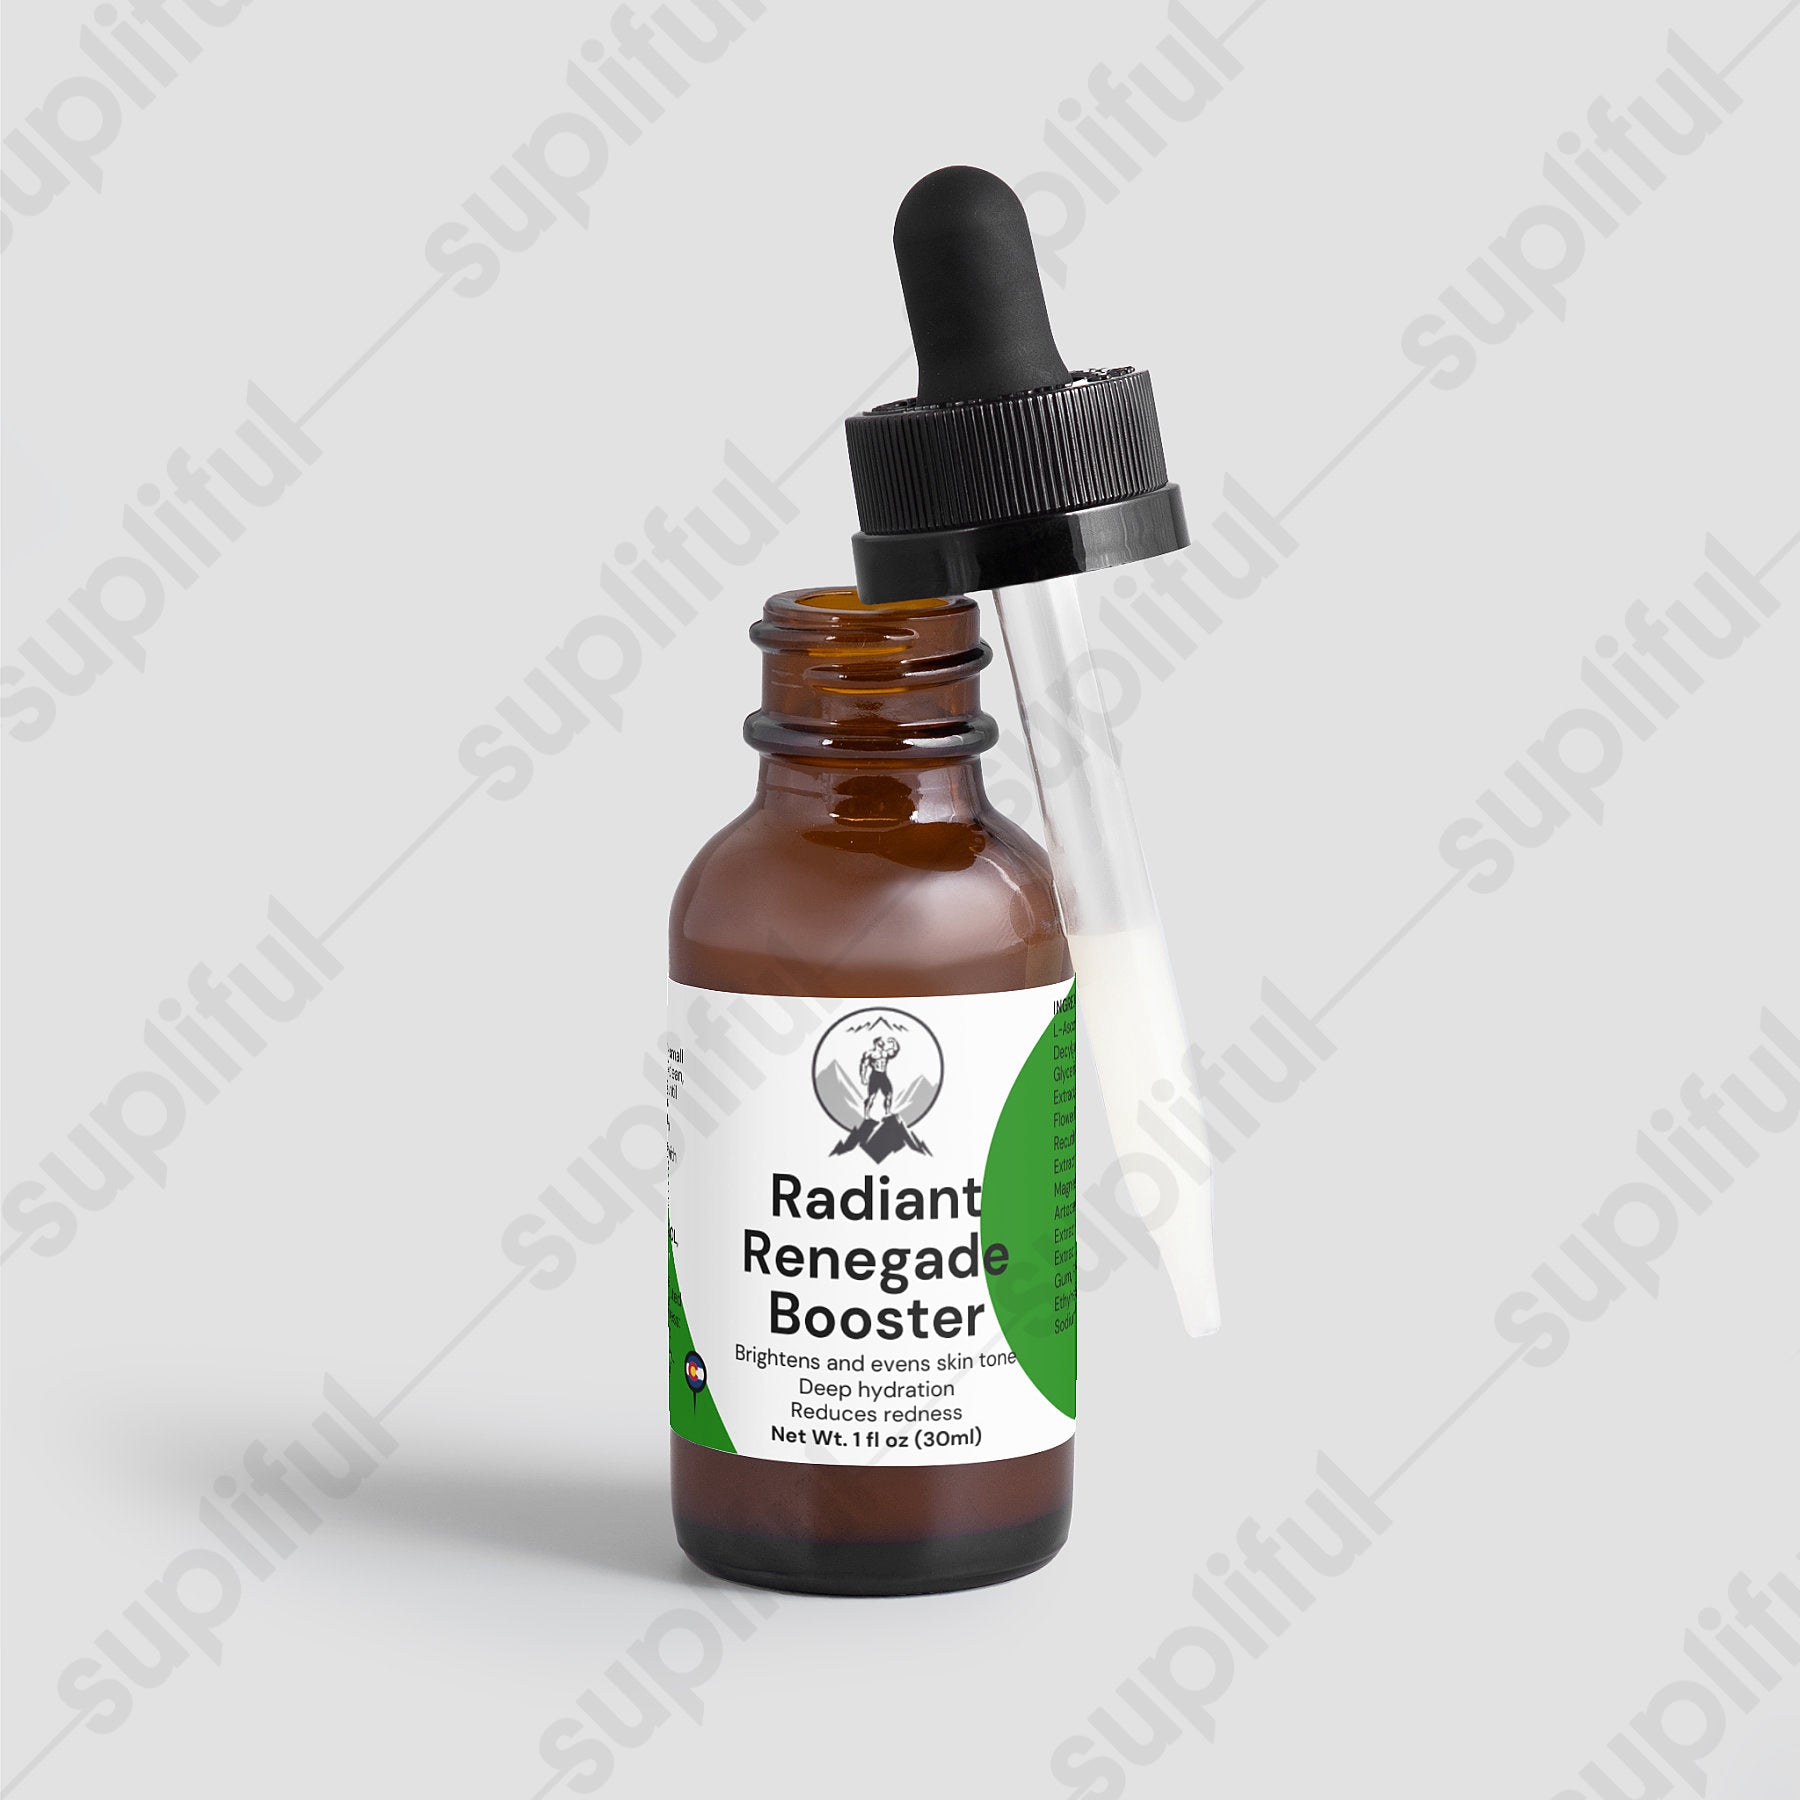 Radiant Renegade BoosterPersonal Care and BeautyThis Vitamin C serum, enriched with Magnesium Ascorbyl Phosphate, Ferulic Acid and Ascorbic Acid, promotes a brighter complexion by reducing dark spots and uneven skRadiant Renegade BoosterThe Rocky Ranger